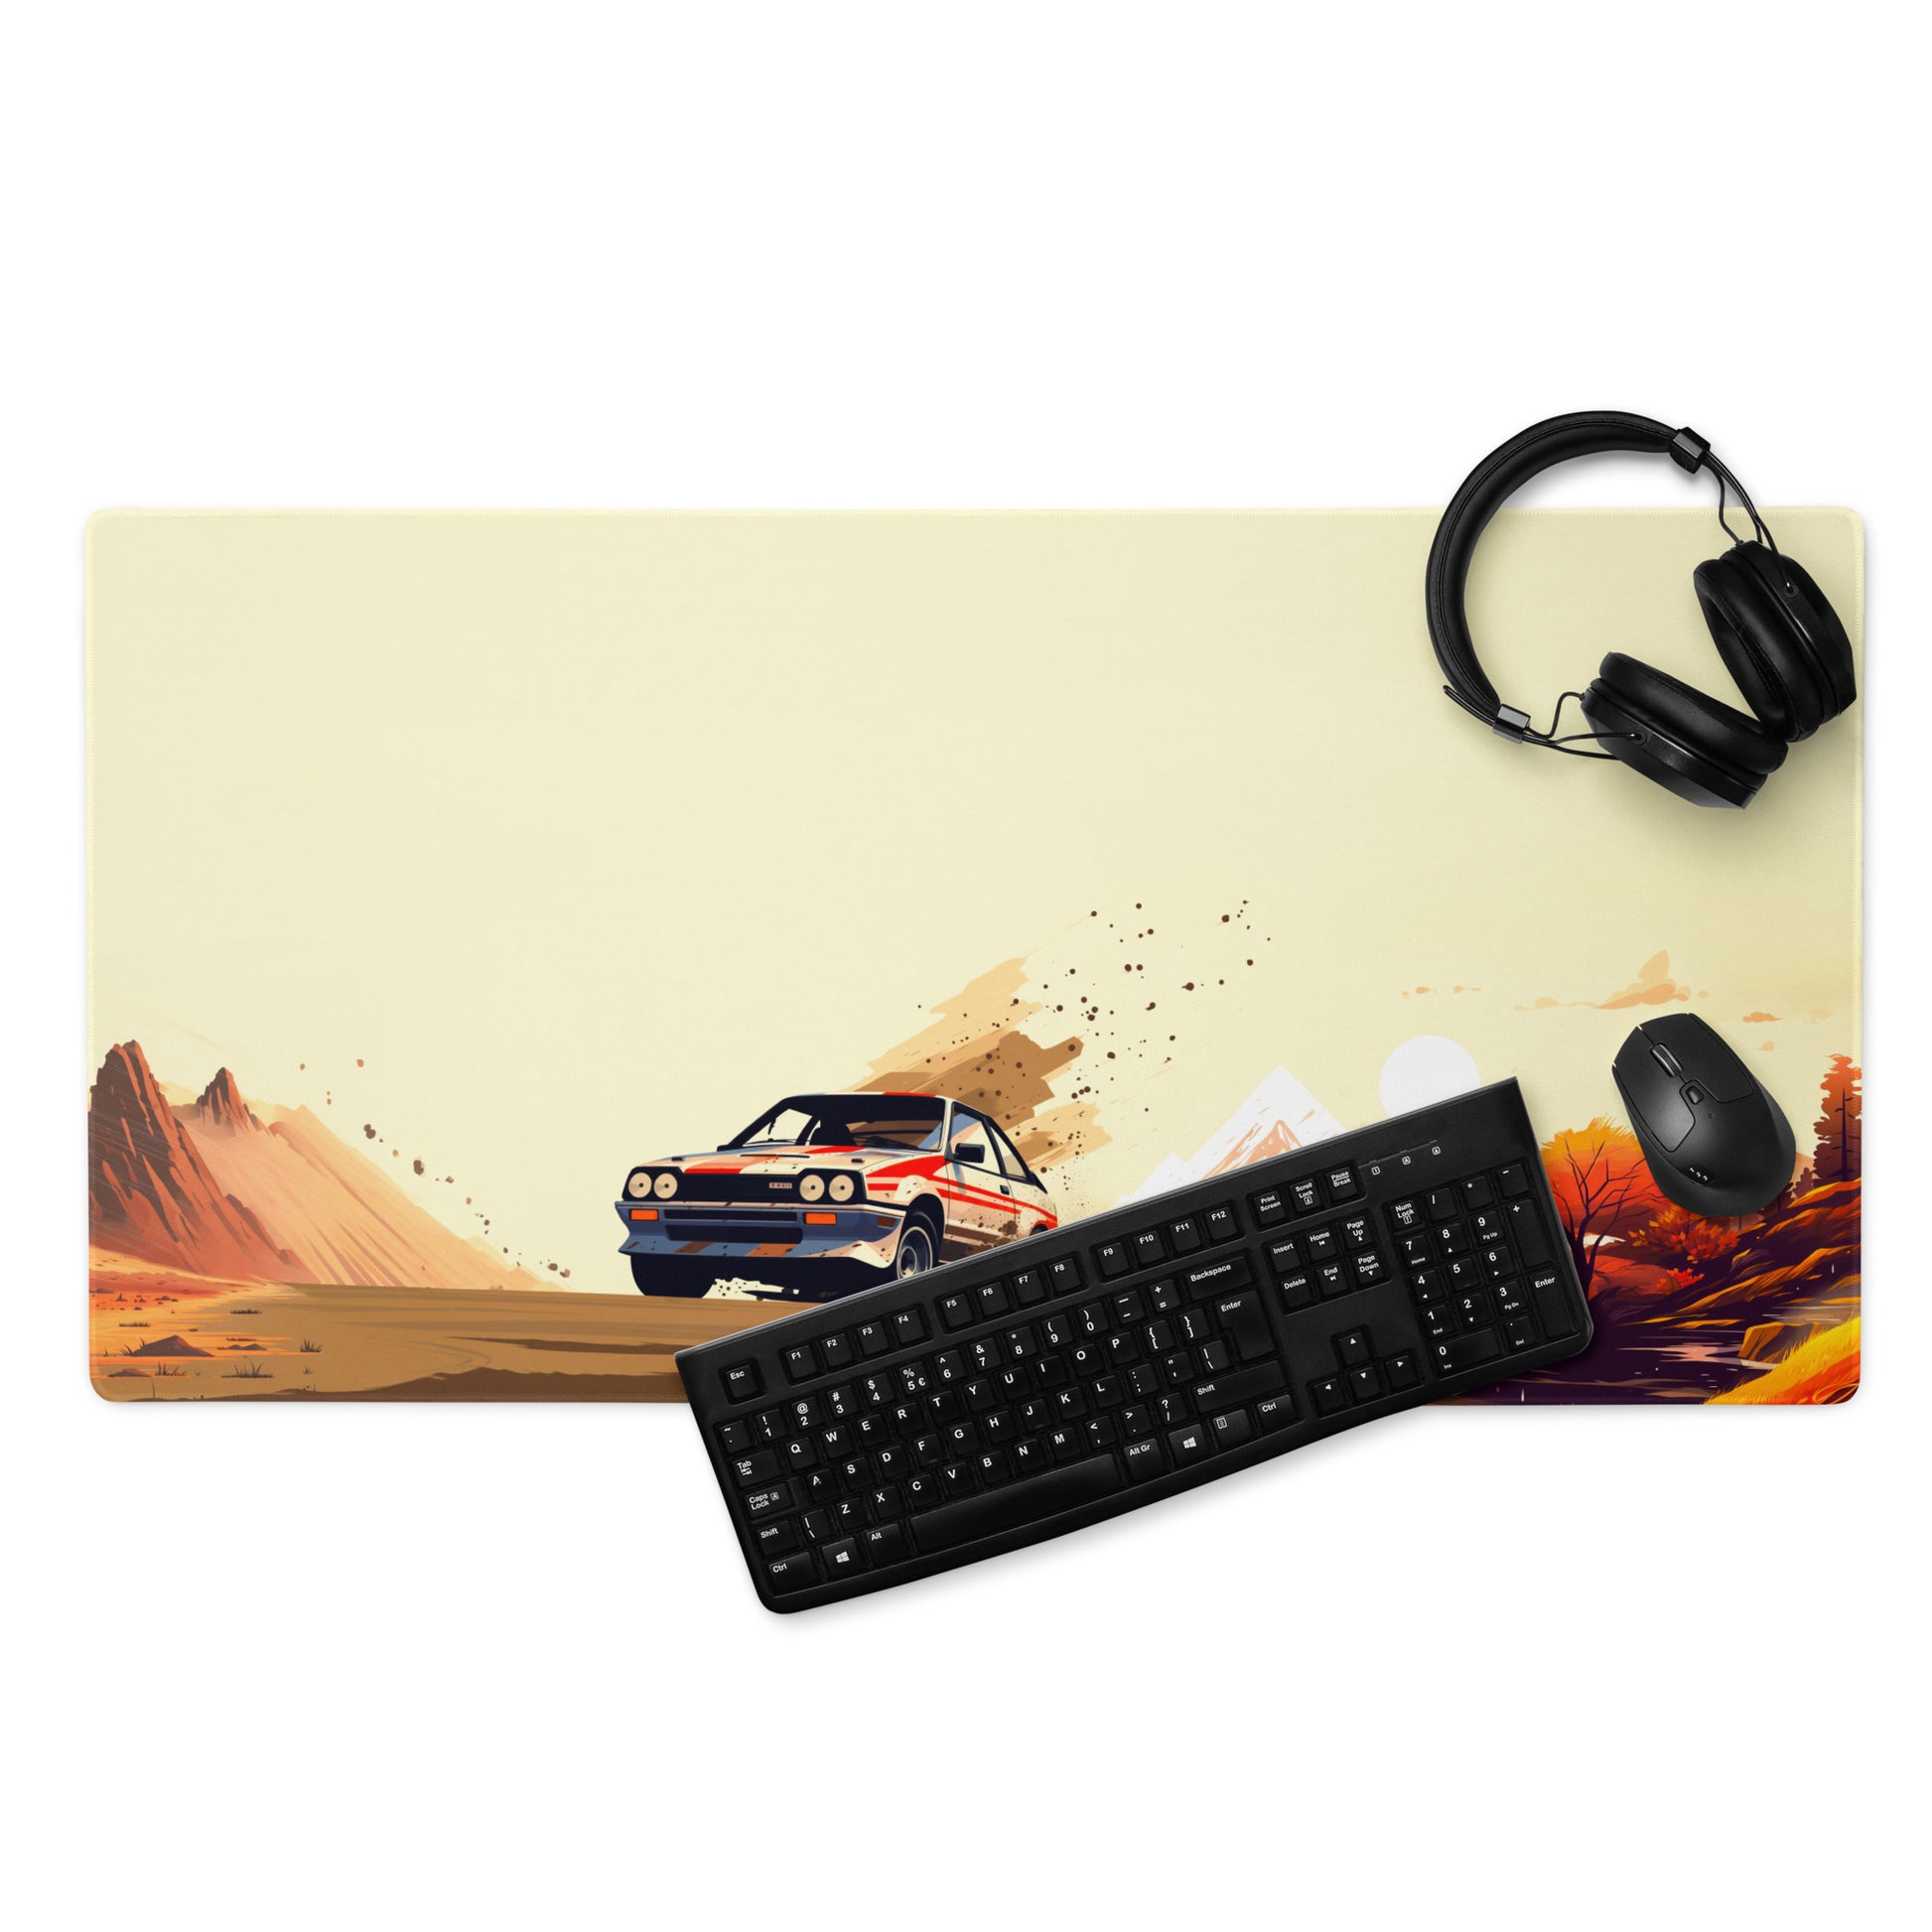 A 36" x 18" gaming desk pad with a Rally car racing through the desert displayed with a keyboard, headphones and a mouse. Brown and Beige in Color.